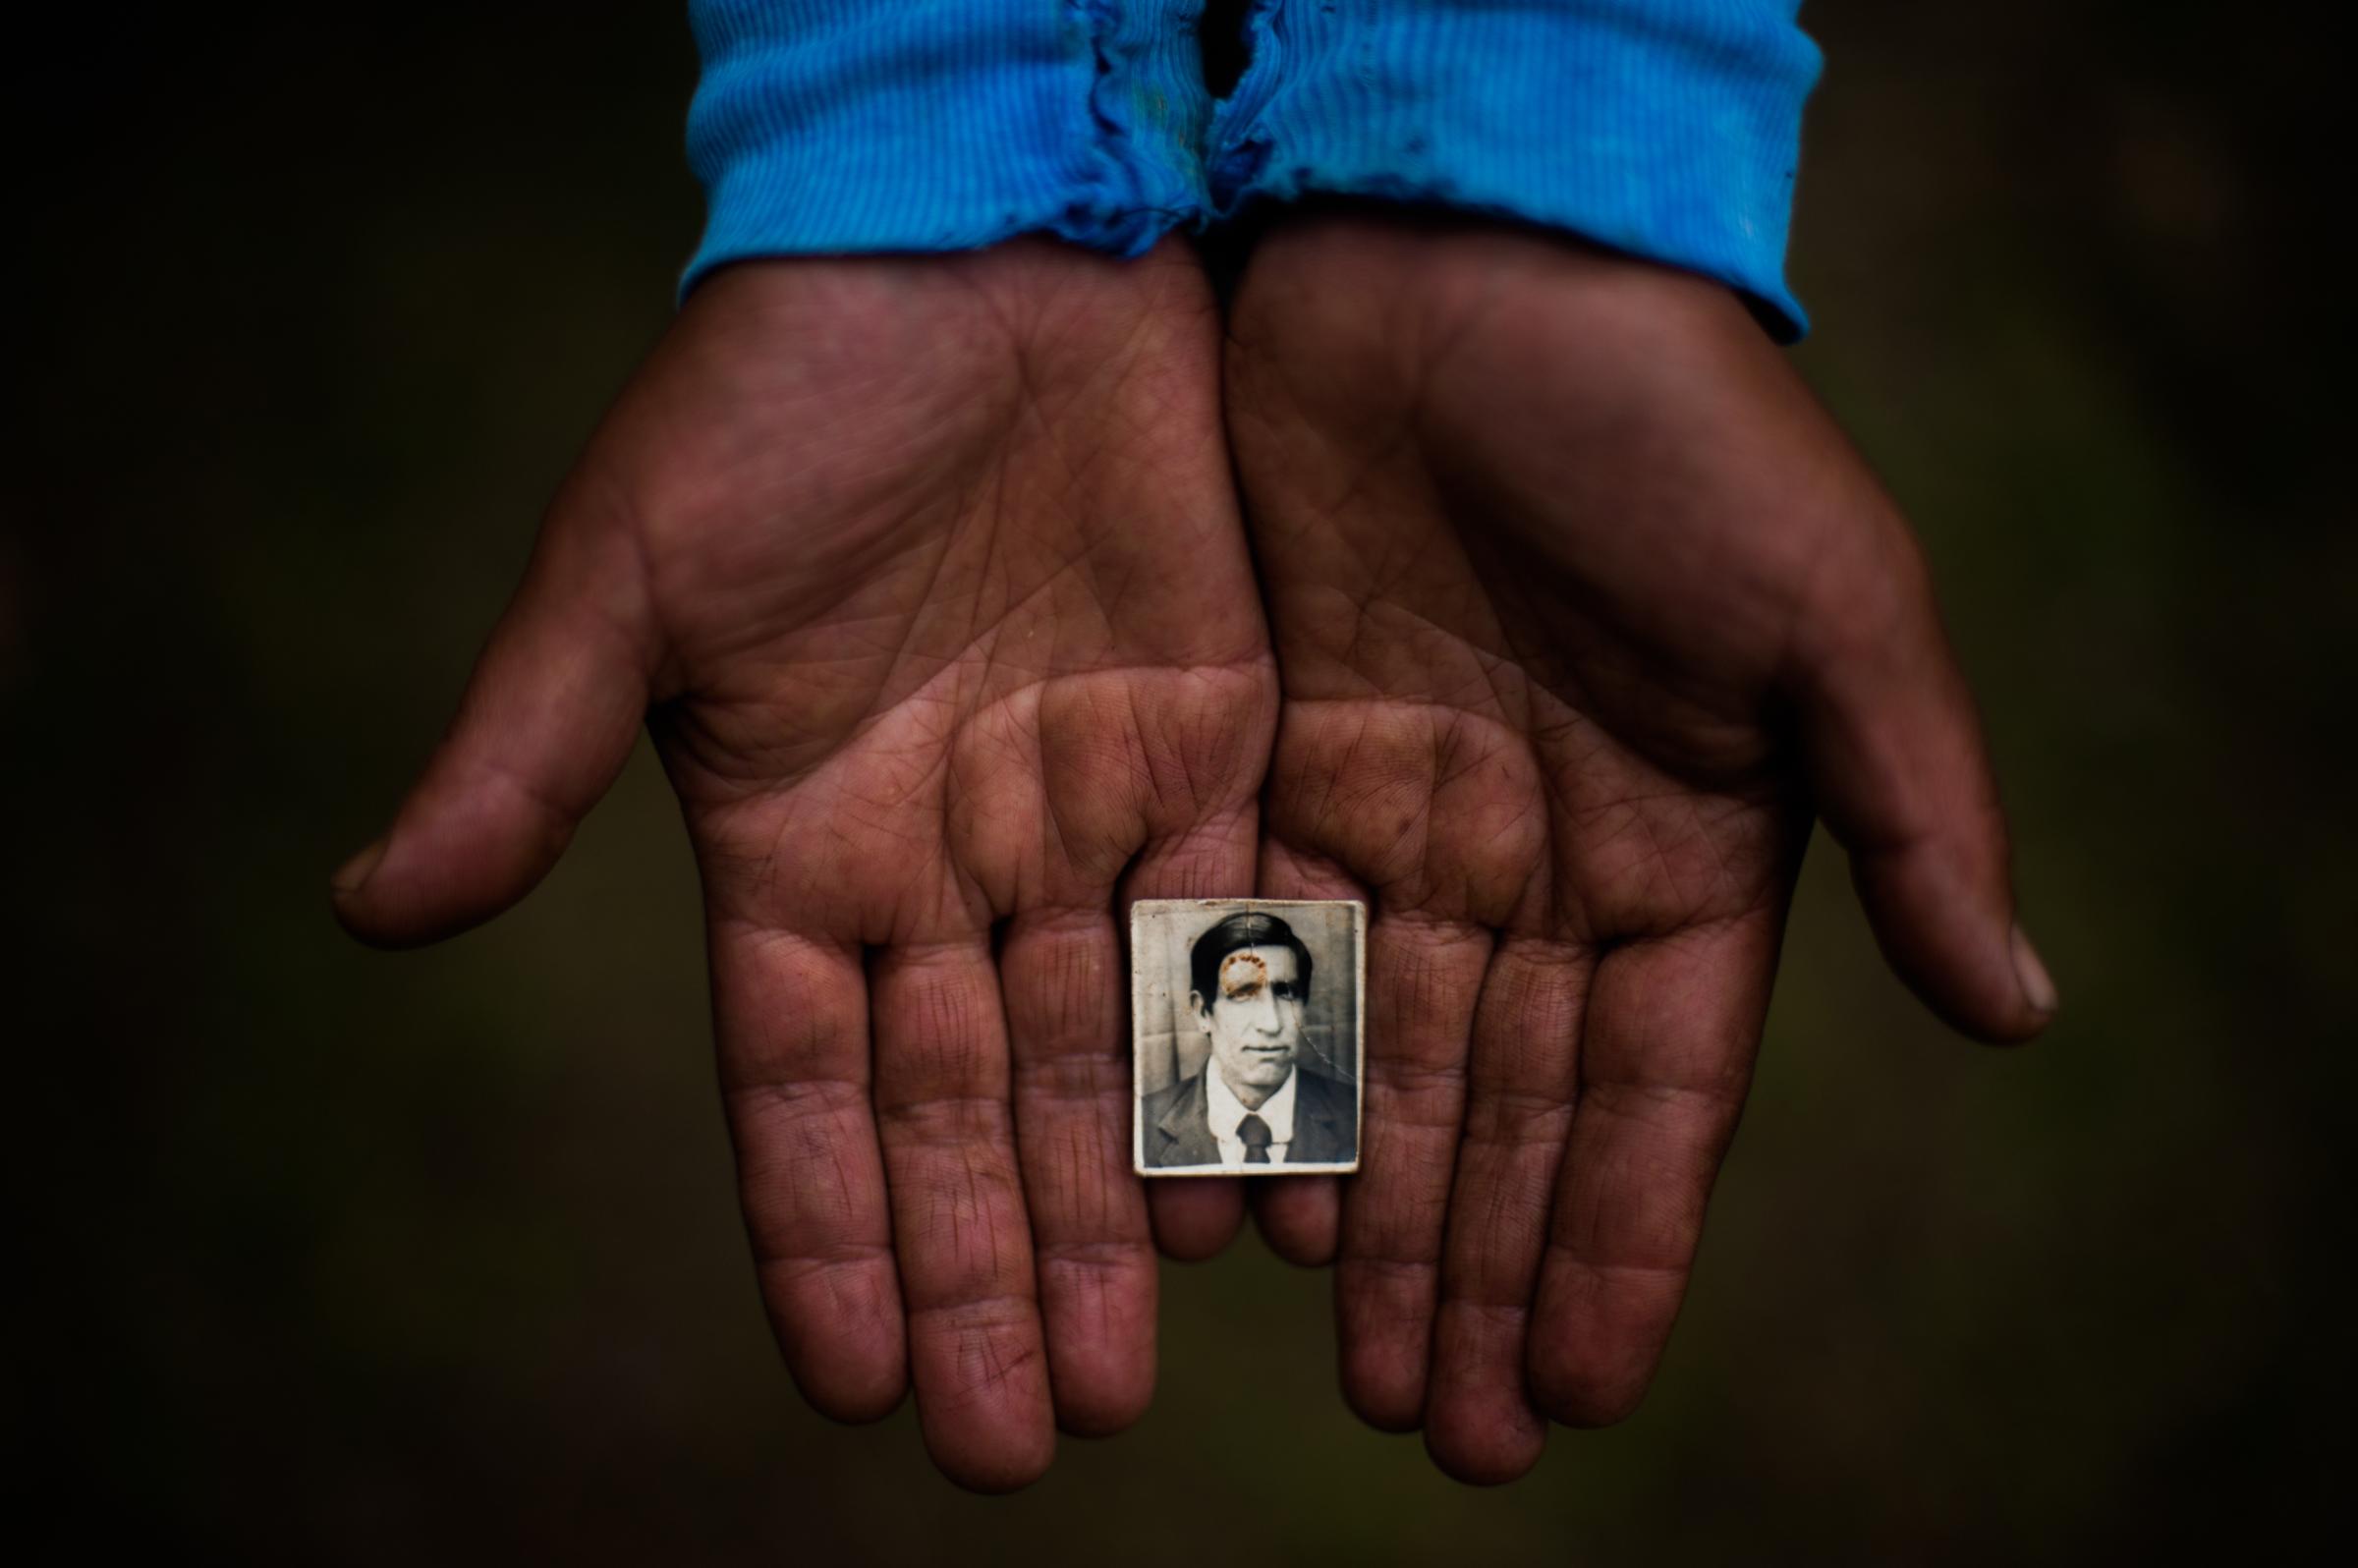 Eulalio Noriega Noriega, 38. From Chajul. Kidnapped on the road to Pulay on August 15th, 1983.